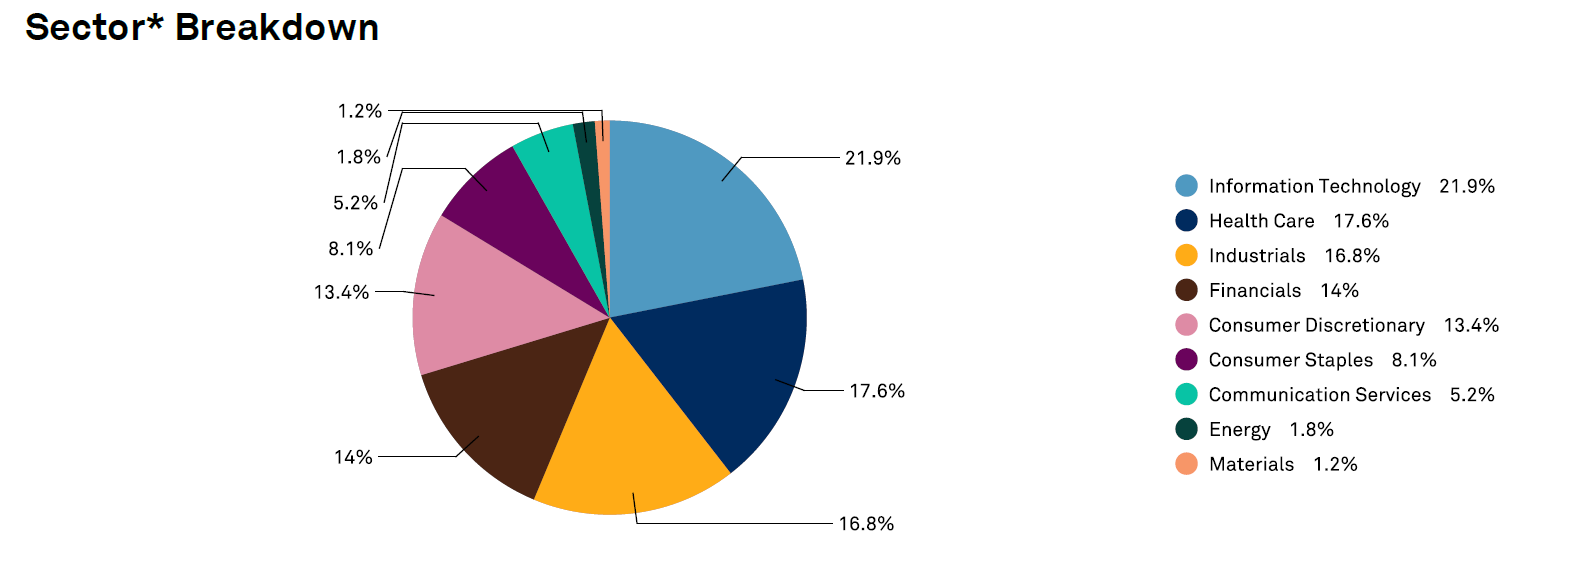 The pie chart above shows the sector breakdown of the Dow Jones Industrial Average as end of December 2020